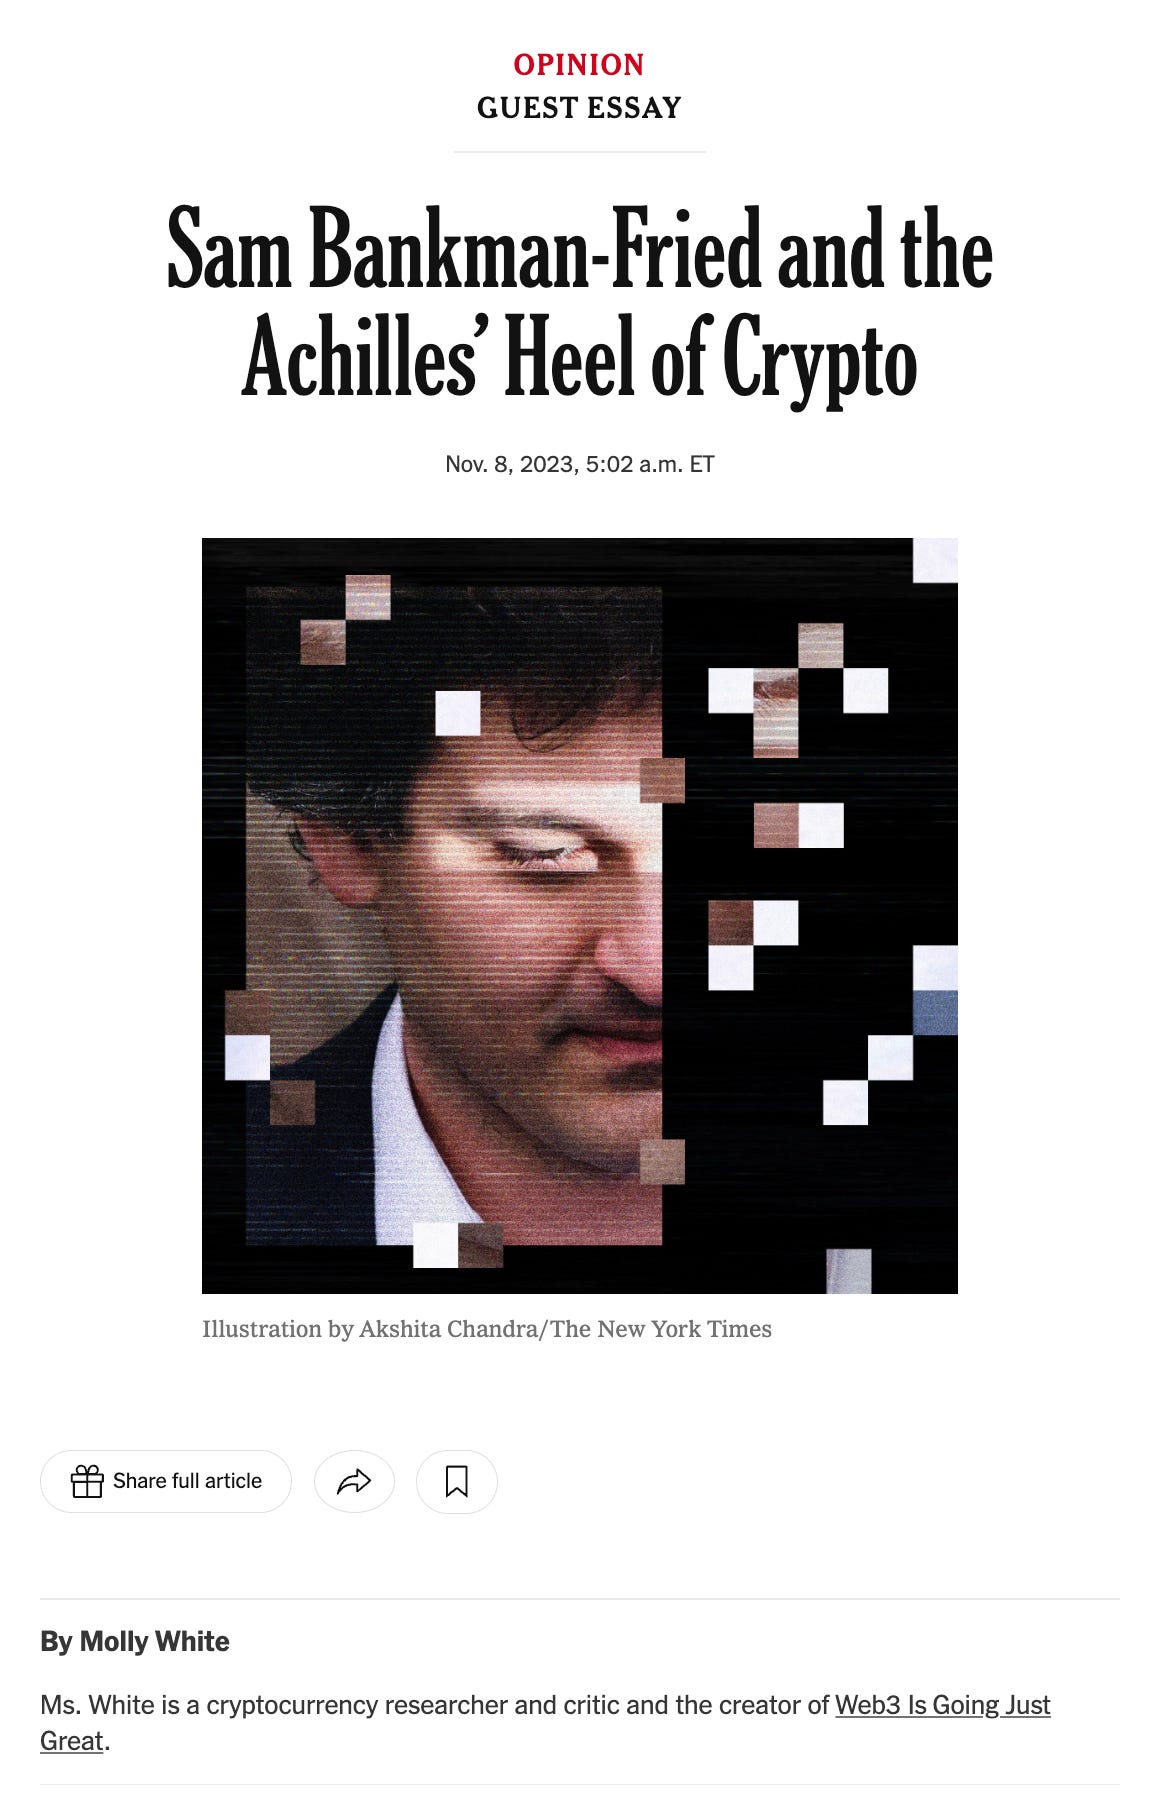 Screenshot of the New York Times: Opinion Guest Essay Sam Bankman-Fried and the Achilles' Heel of Crypto Nov. 8 2023, 5:02 a.m. ET By Molly White Ms. White is a cryptocurrency researcher and critic and the creator of Web3 is Going Just Great